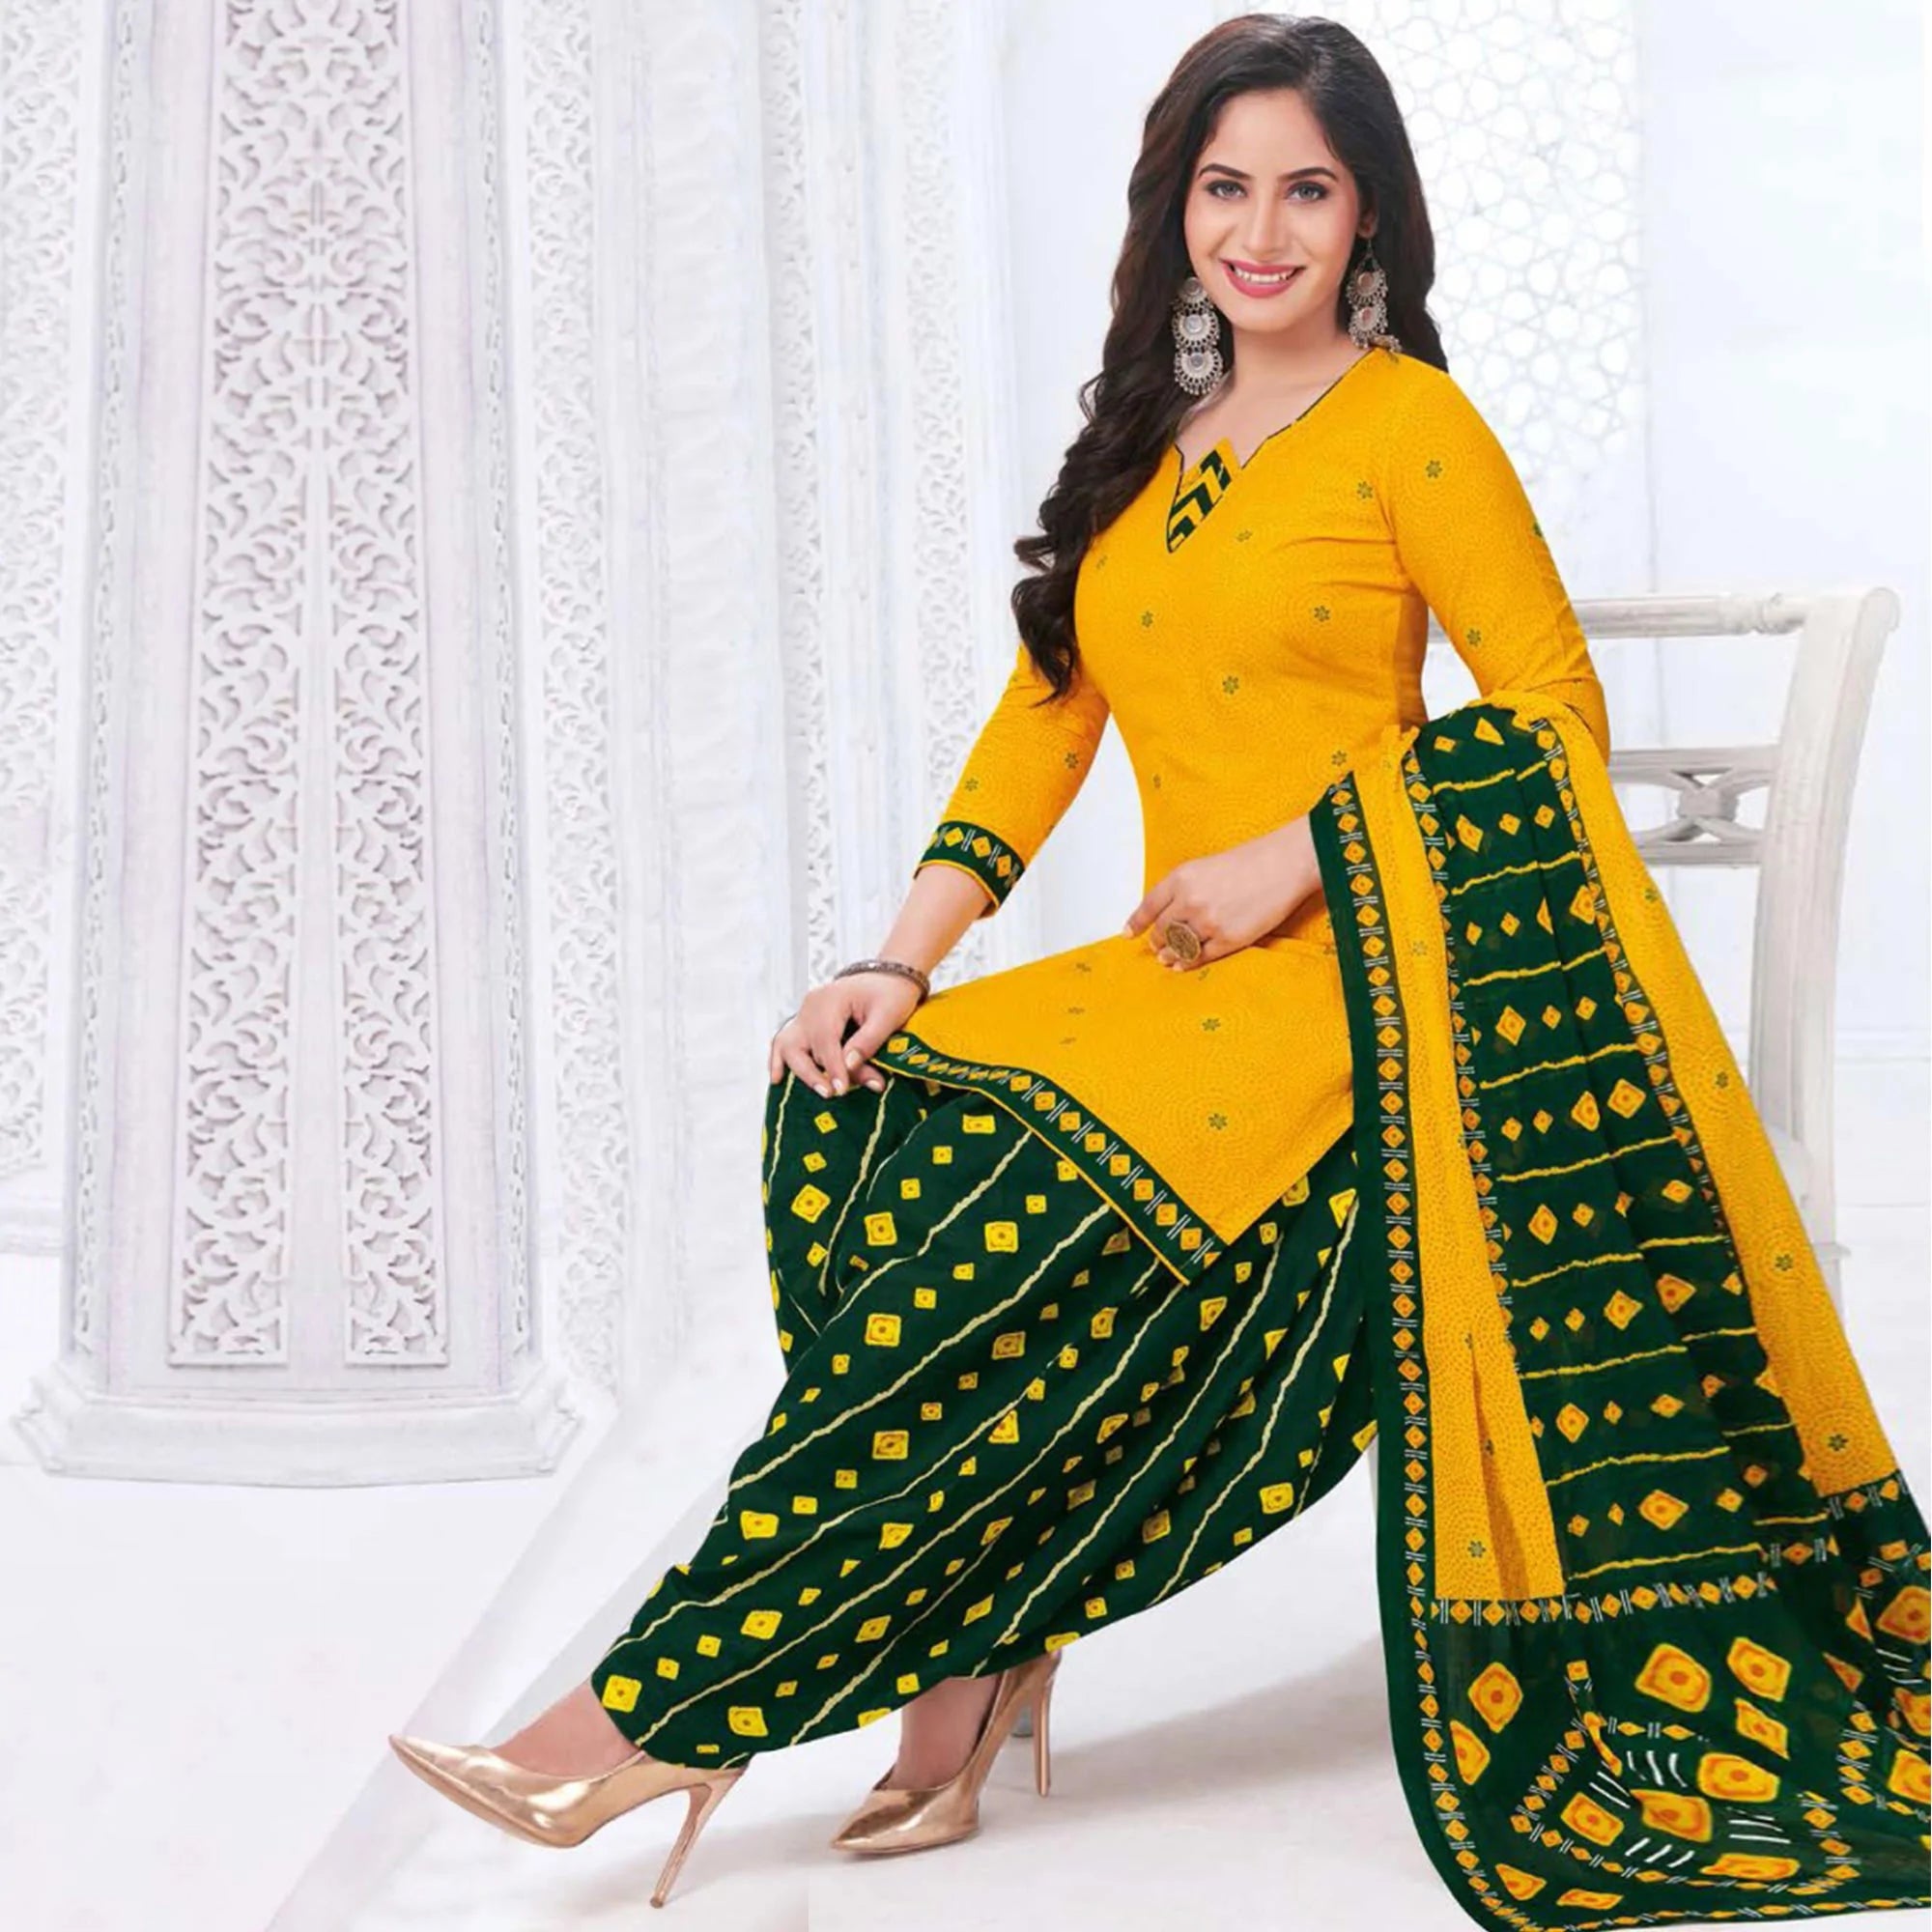 Off-white and Yellow Salwar Suit With Kashmiri Embroidery, Designer Salwar  Suits, Kashmiri Embroidered Dress - Etsy